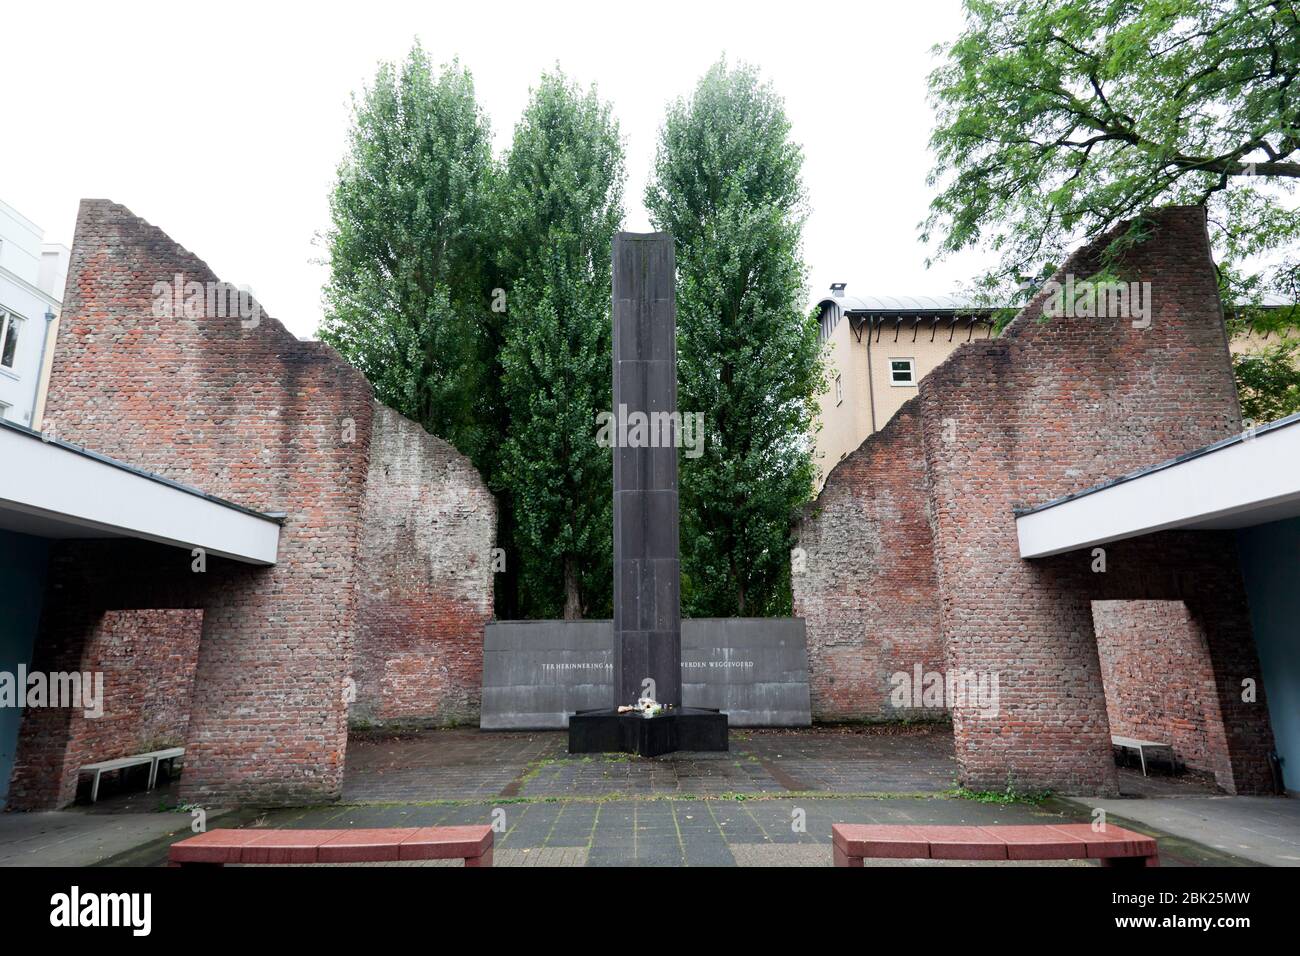 National Holocaust Memorial in the Hollandsche Schouburg, a former Theatre used by the Nazi occupiers as a Deportation Centre for Jews during WWII Stock Photo